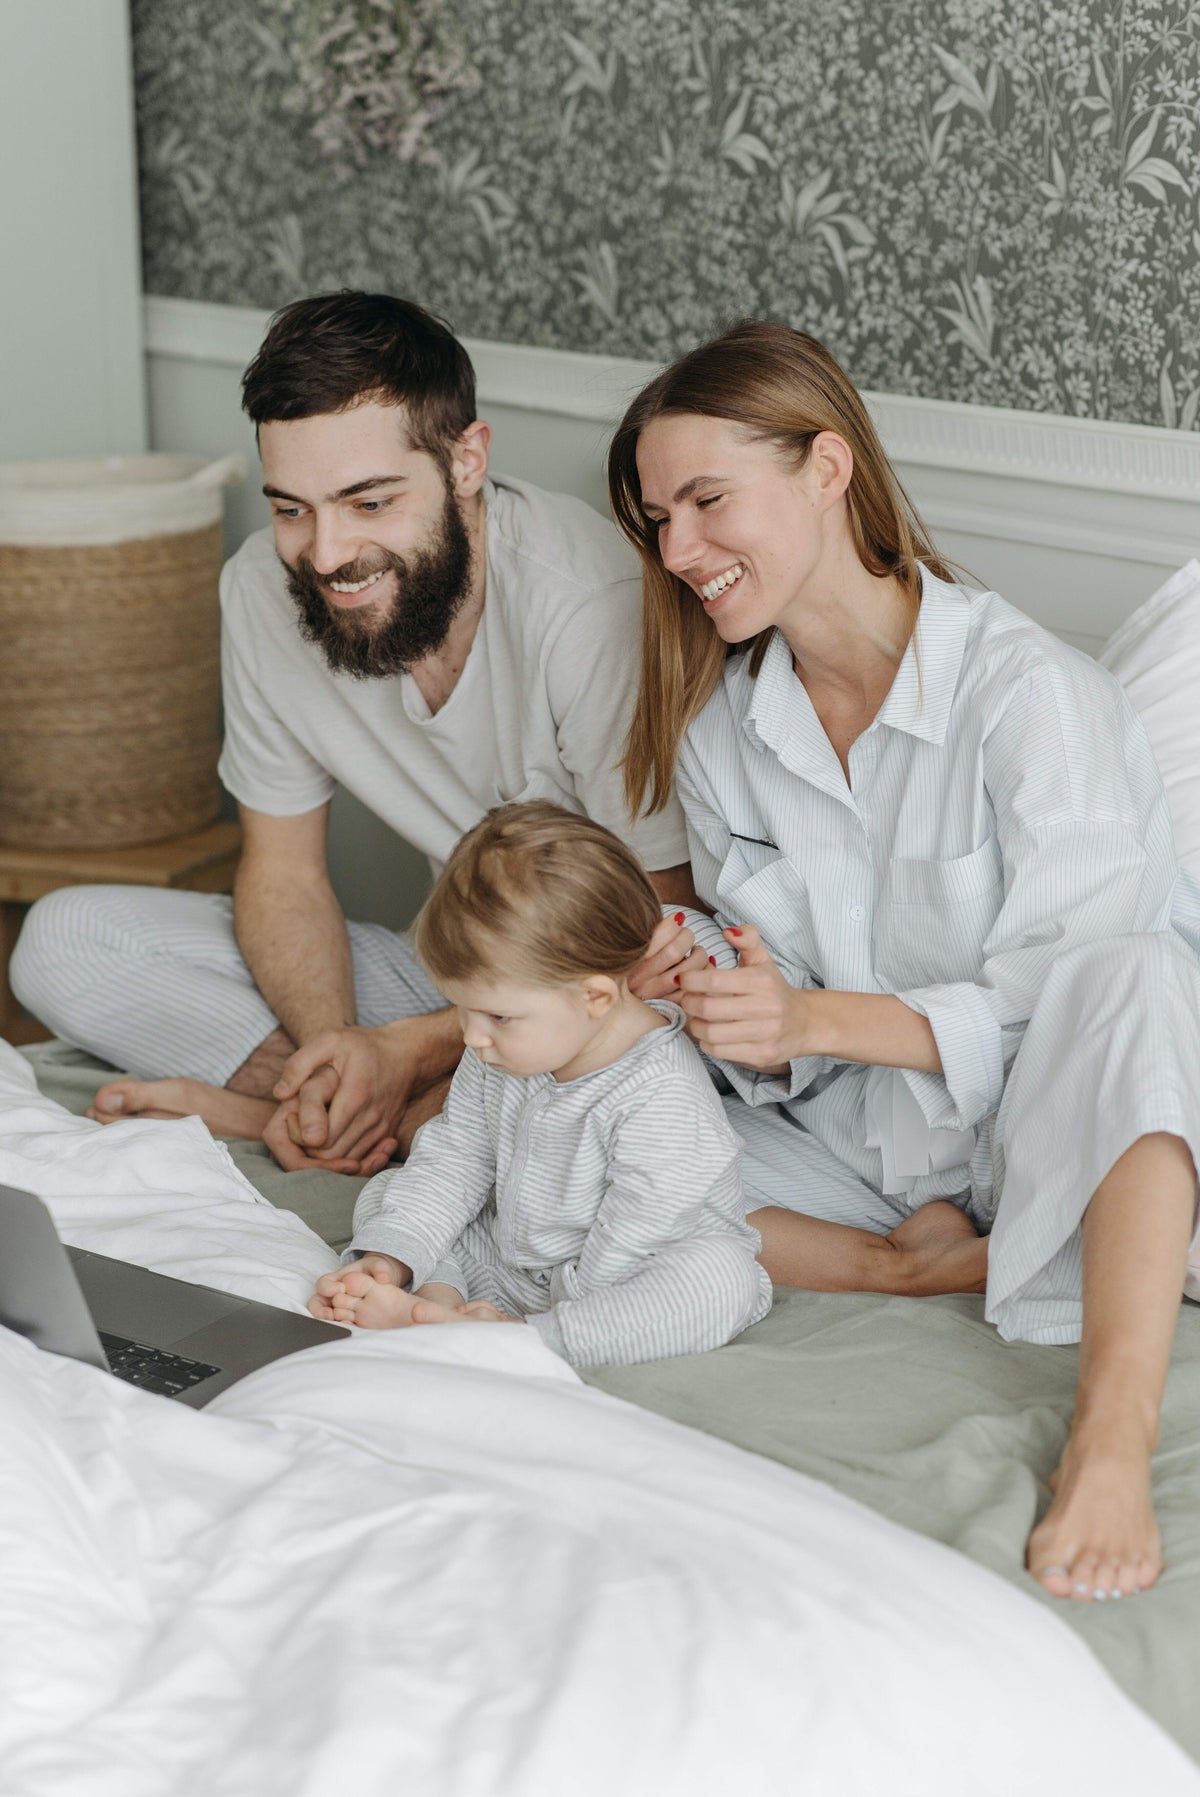 Parents and child watching on a computer